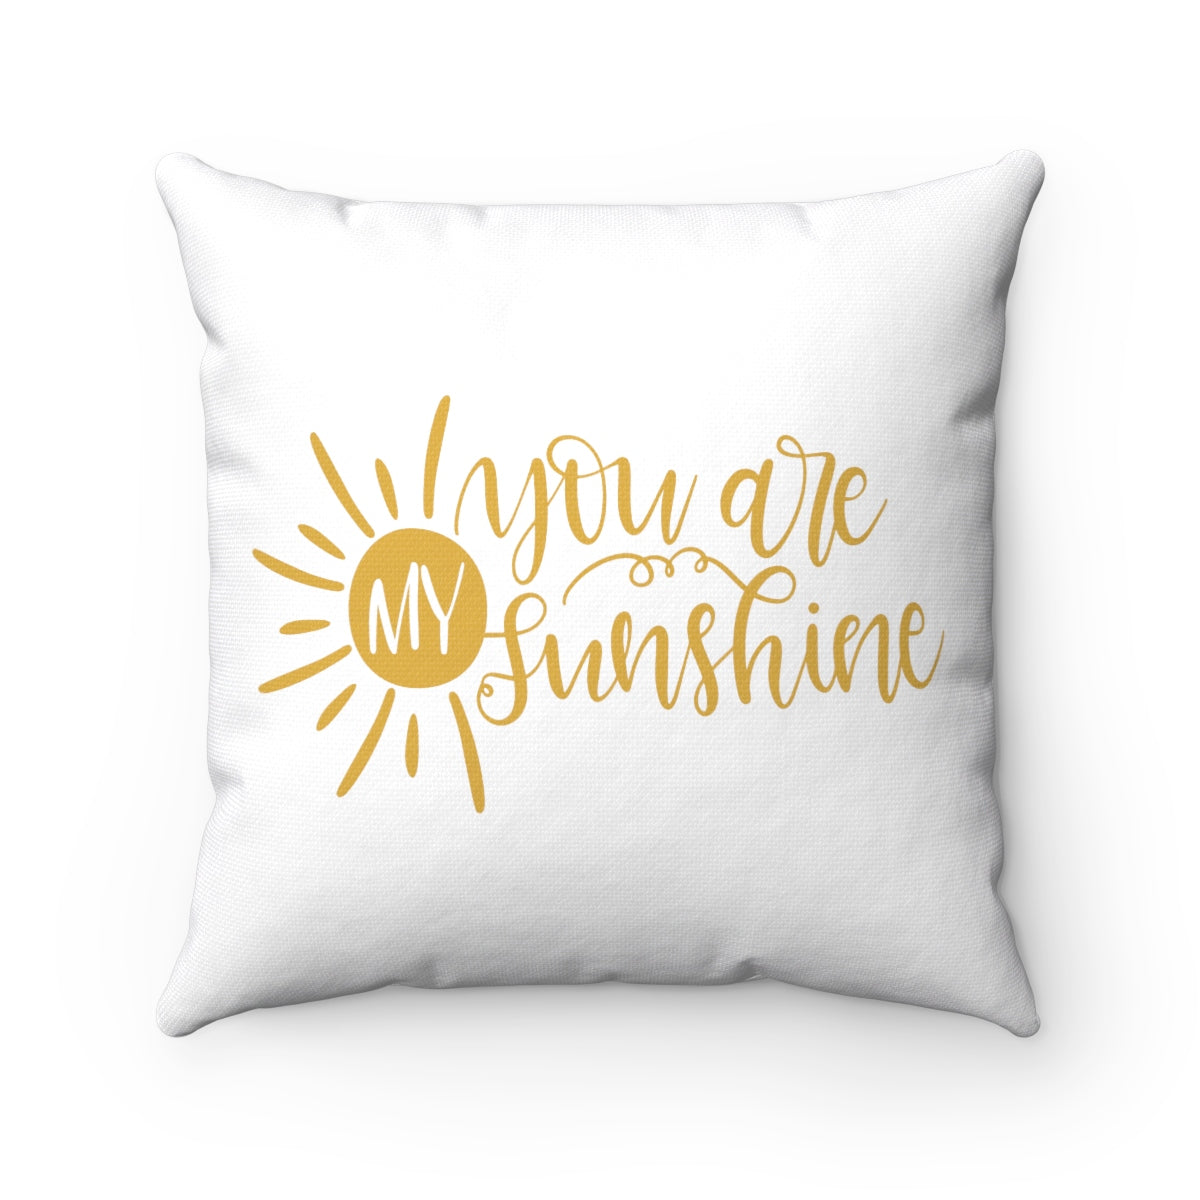 You Are My Sunshine Spun Polyester Square Throw Pillow - Inspired By Savy